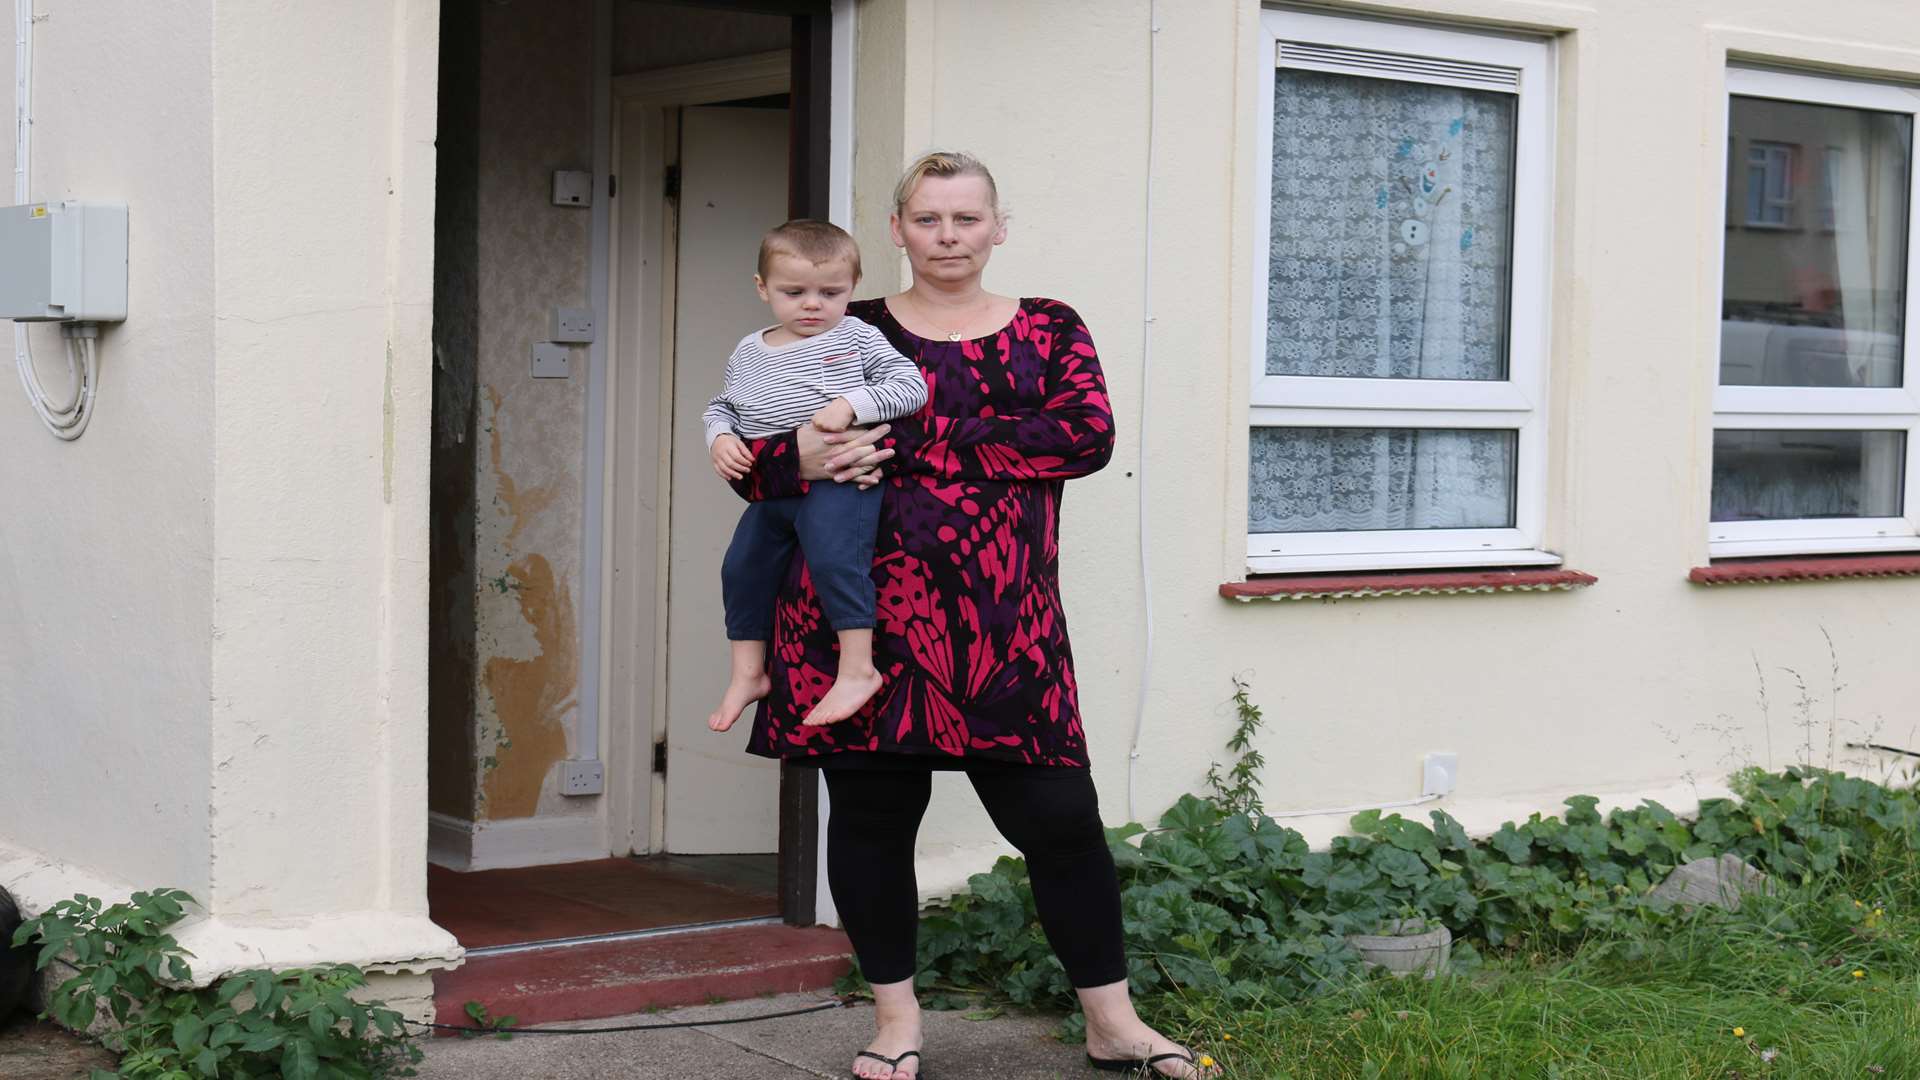 Sinead De Lobel and her two-year-old Callum outside their home in Dickens Road, Gravesend